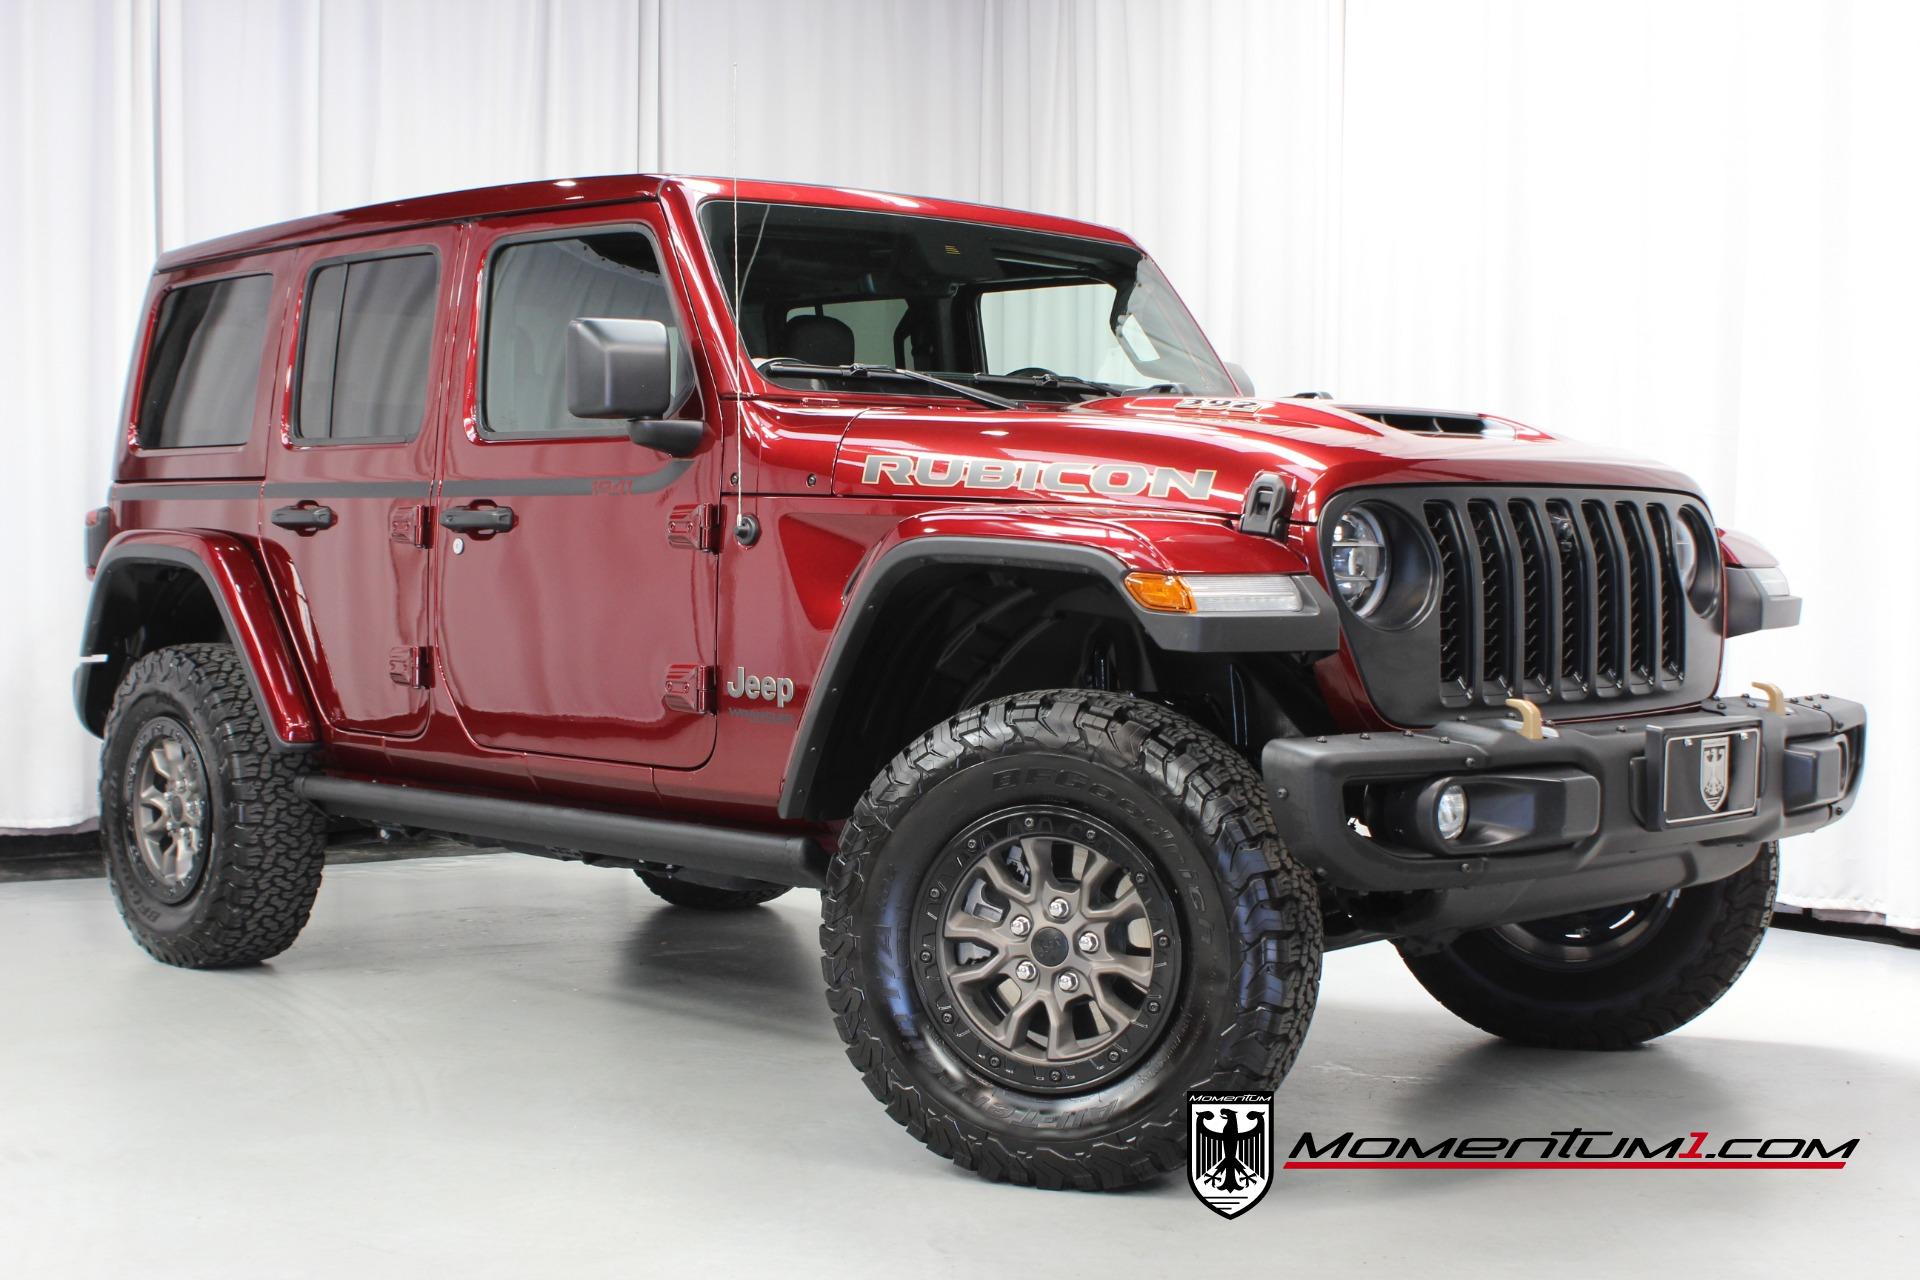 Used 2021 Jeep Wrangler Unlimited Rubicon 392 For Sale (Sold) | Momentum  Motorcars Inc Stock #761680